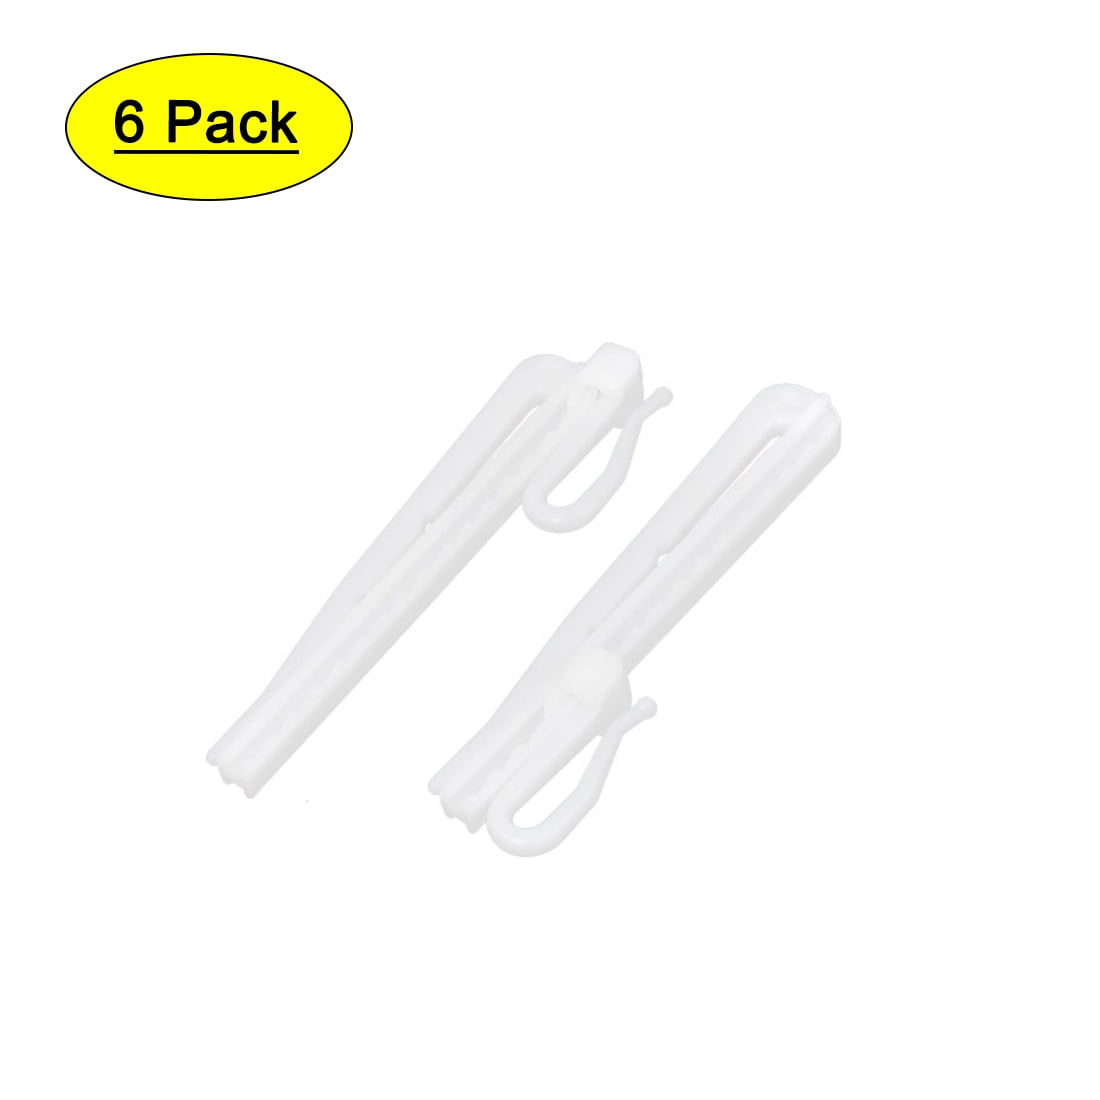 100 X Curtain Hooks for Curtains With Header Tape White Plastic Nylon 